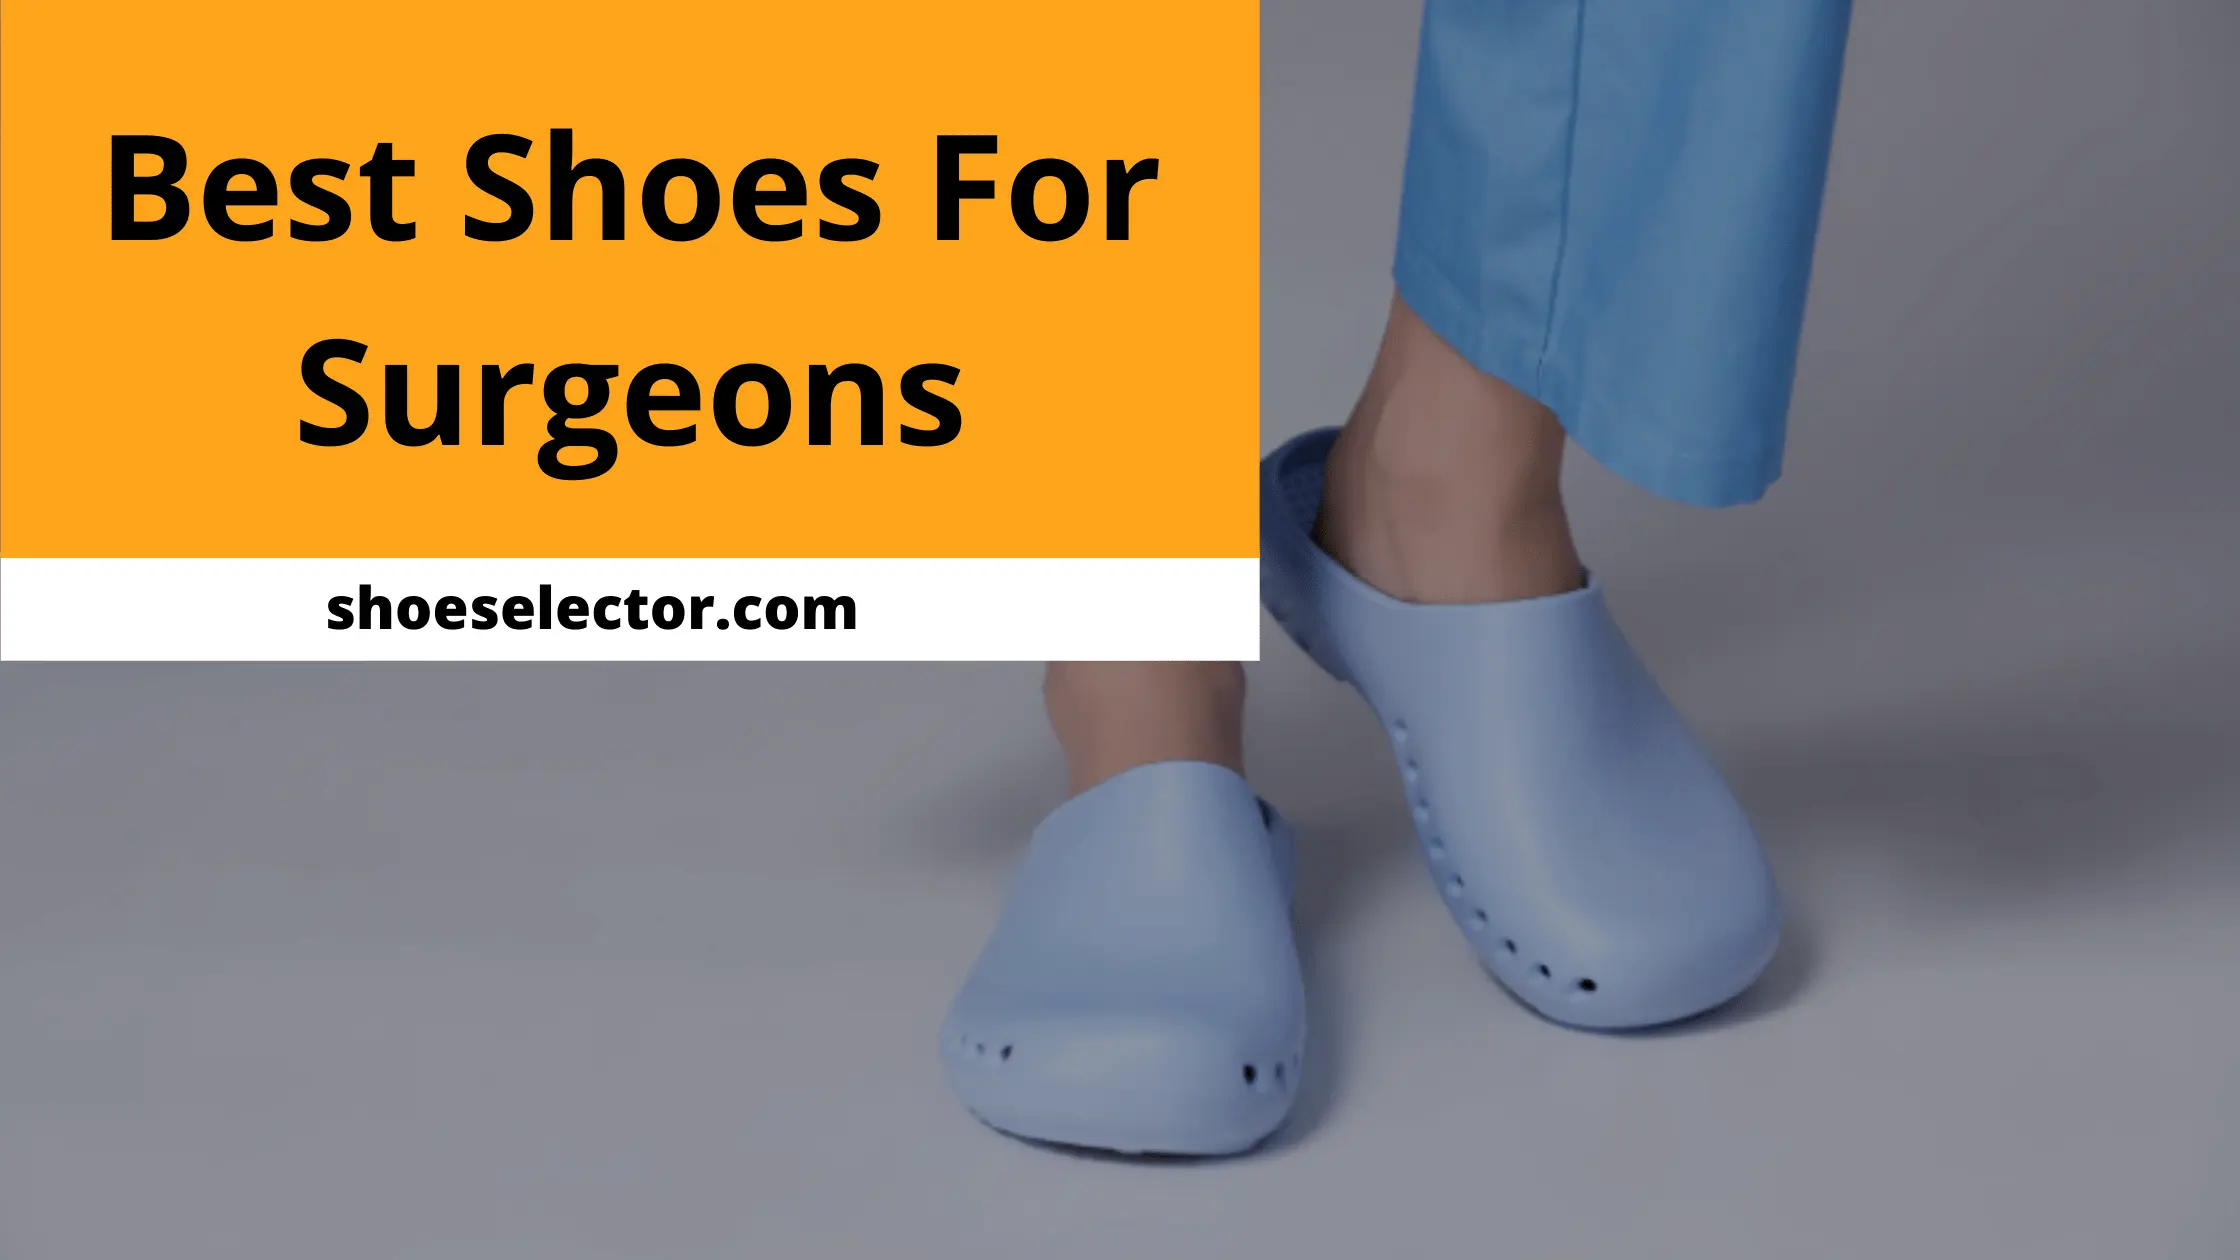 Best Shoes For Surgeons | Buying Guide